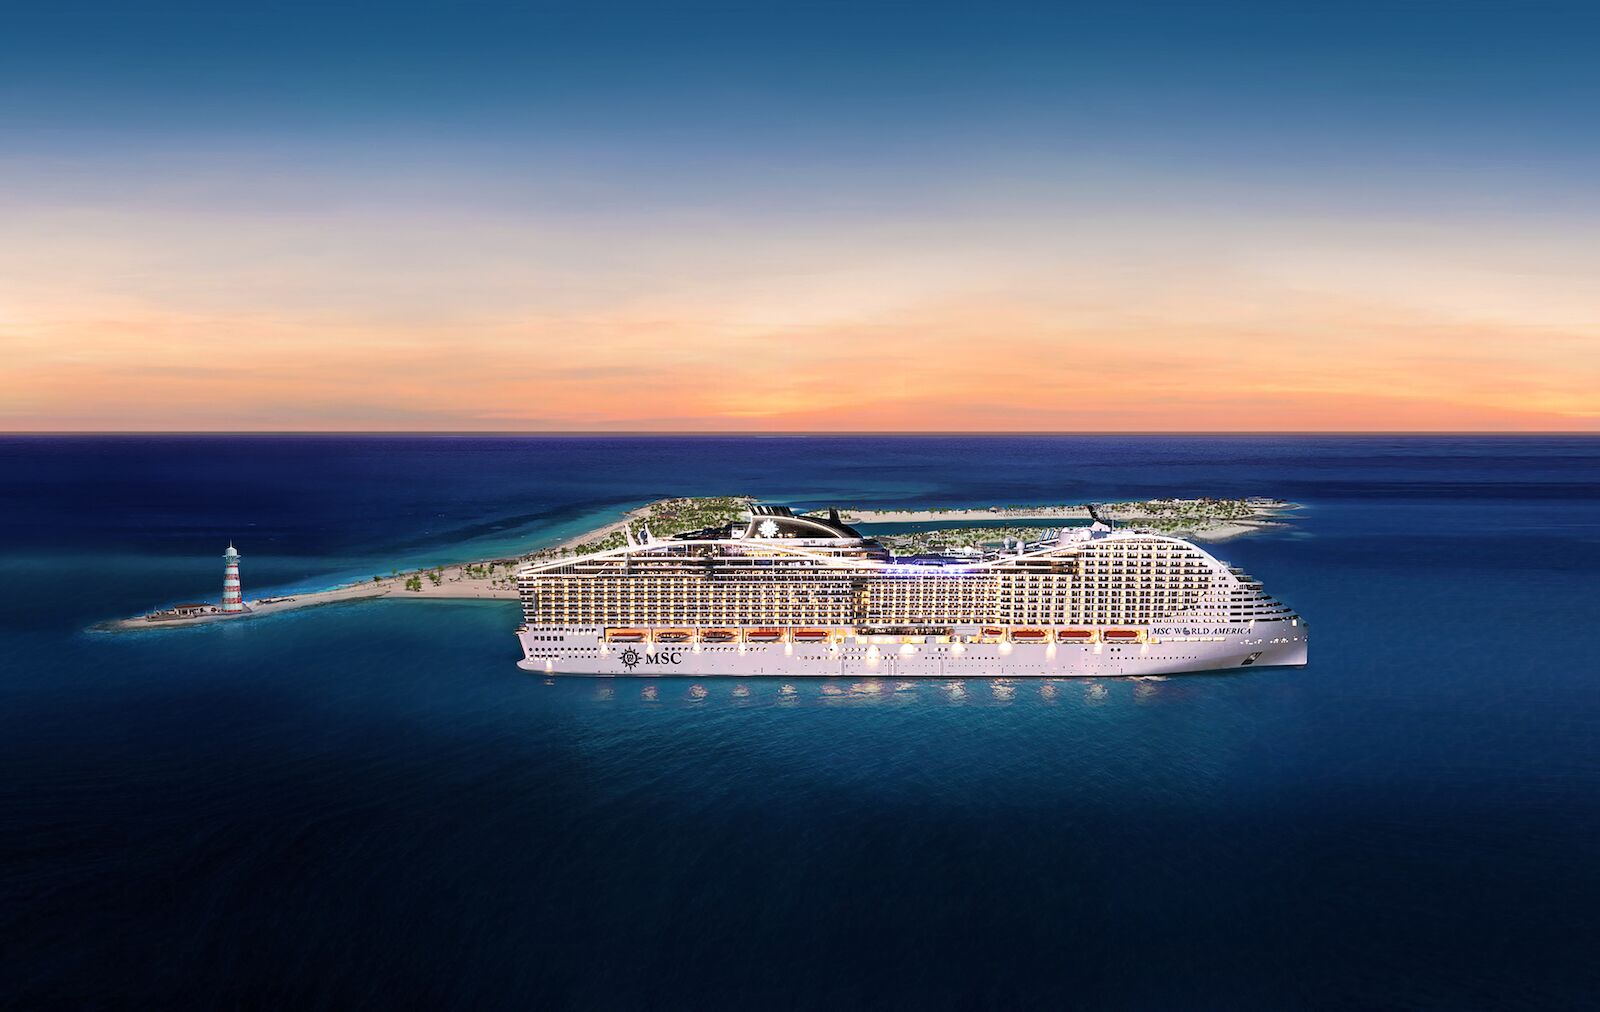 MSC World America is cruise line MSC's newest ship, launching in April 2025